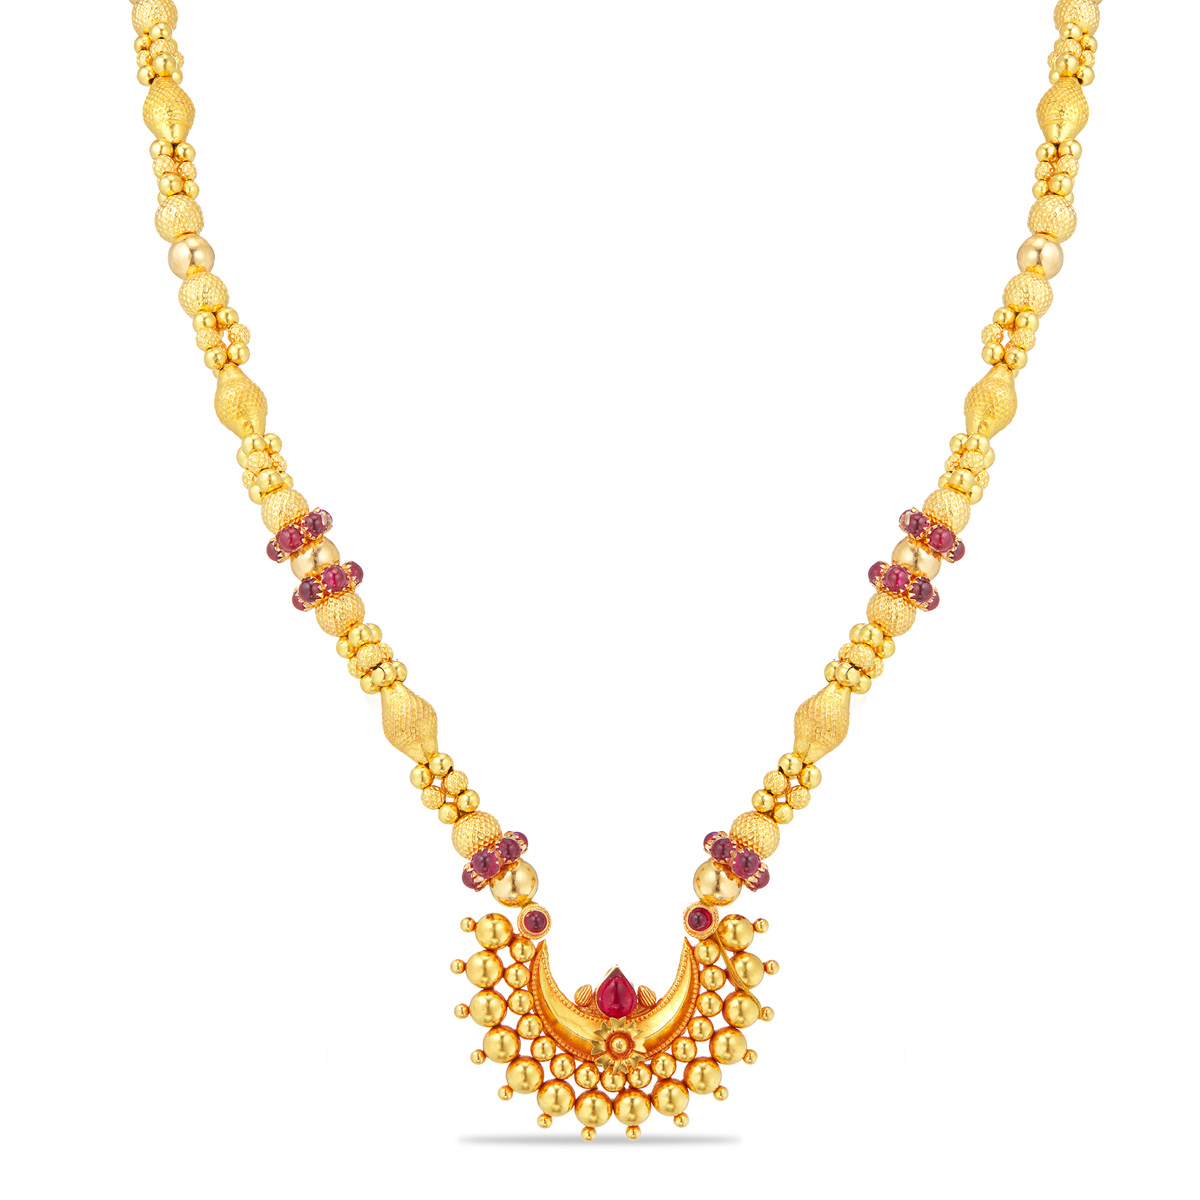 The Yellow chand necklace